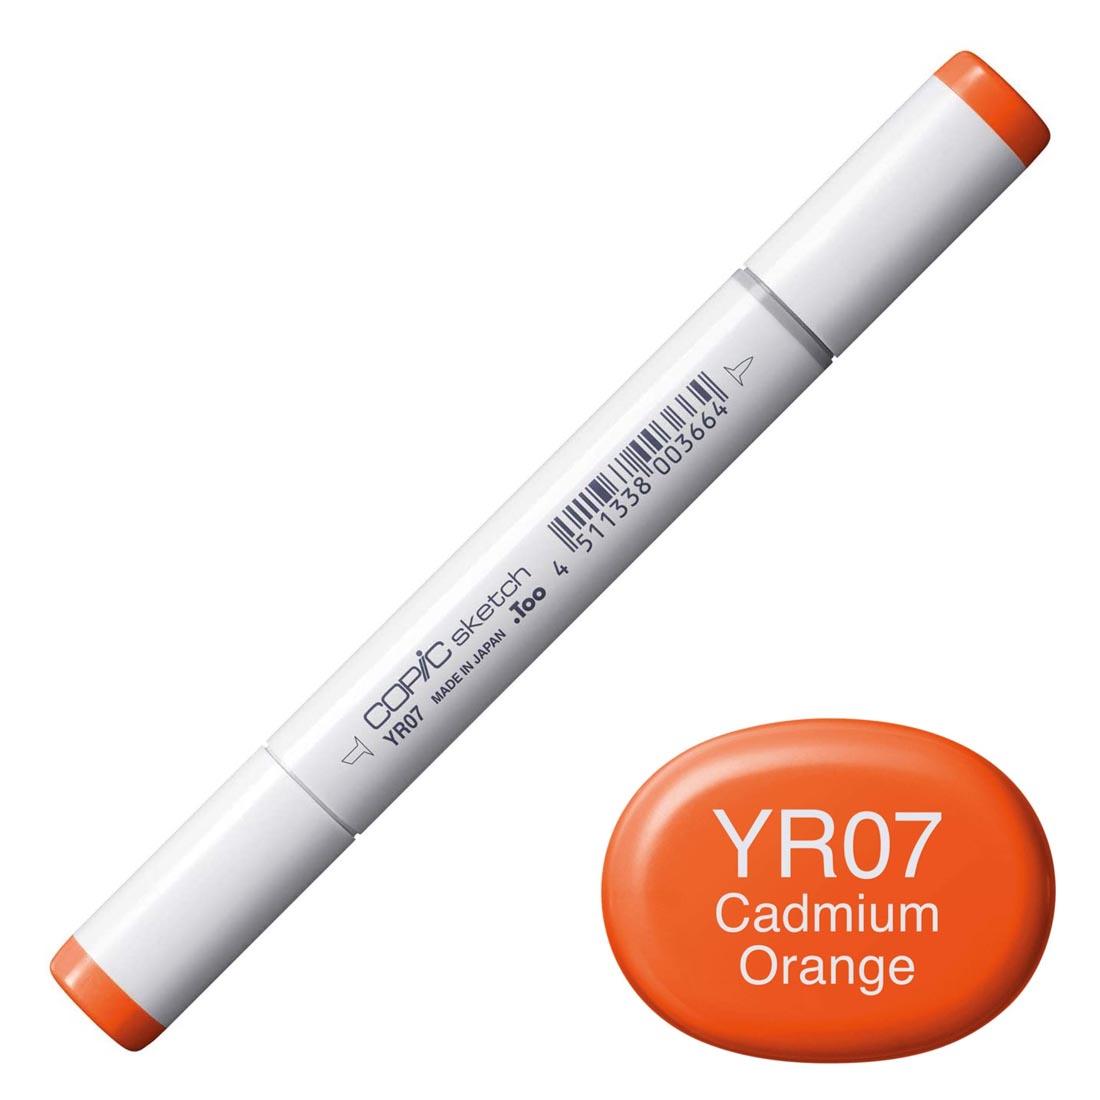 COPIC Sketch Marker with a color swatch and text of YR07 Cadmium Orange